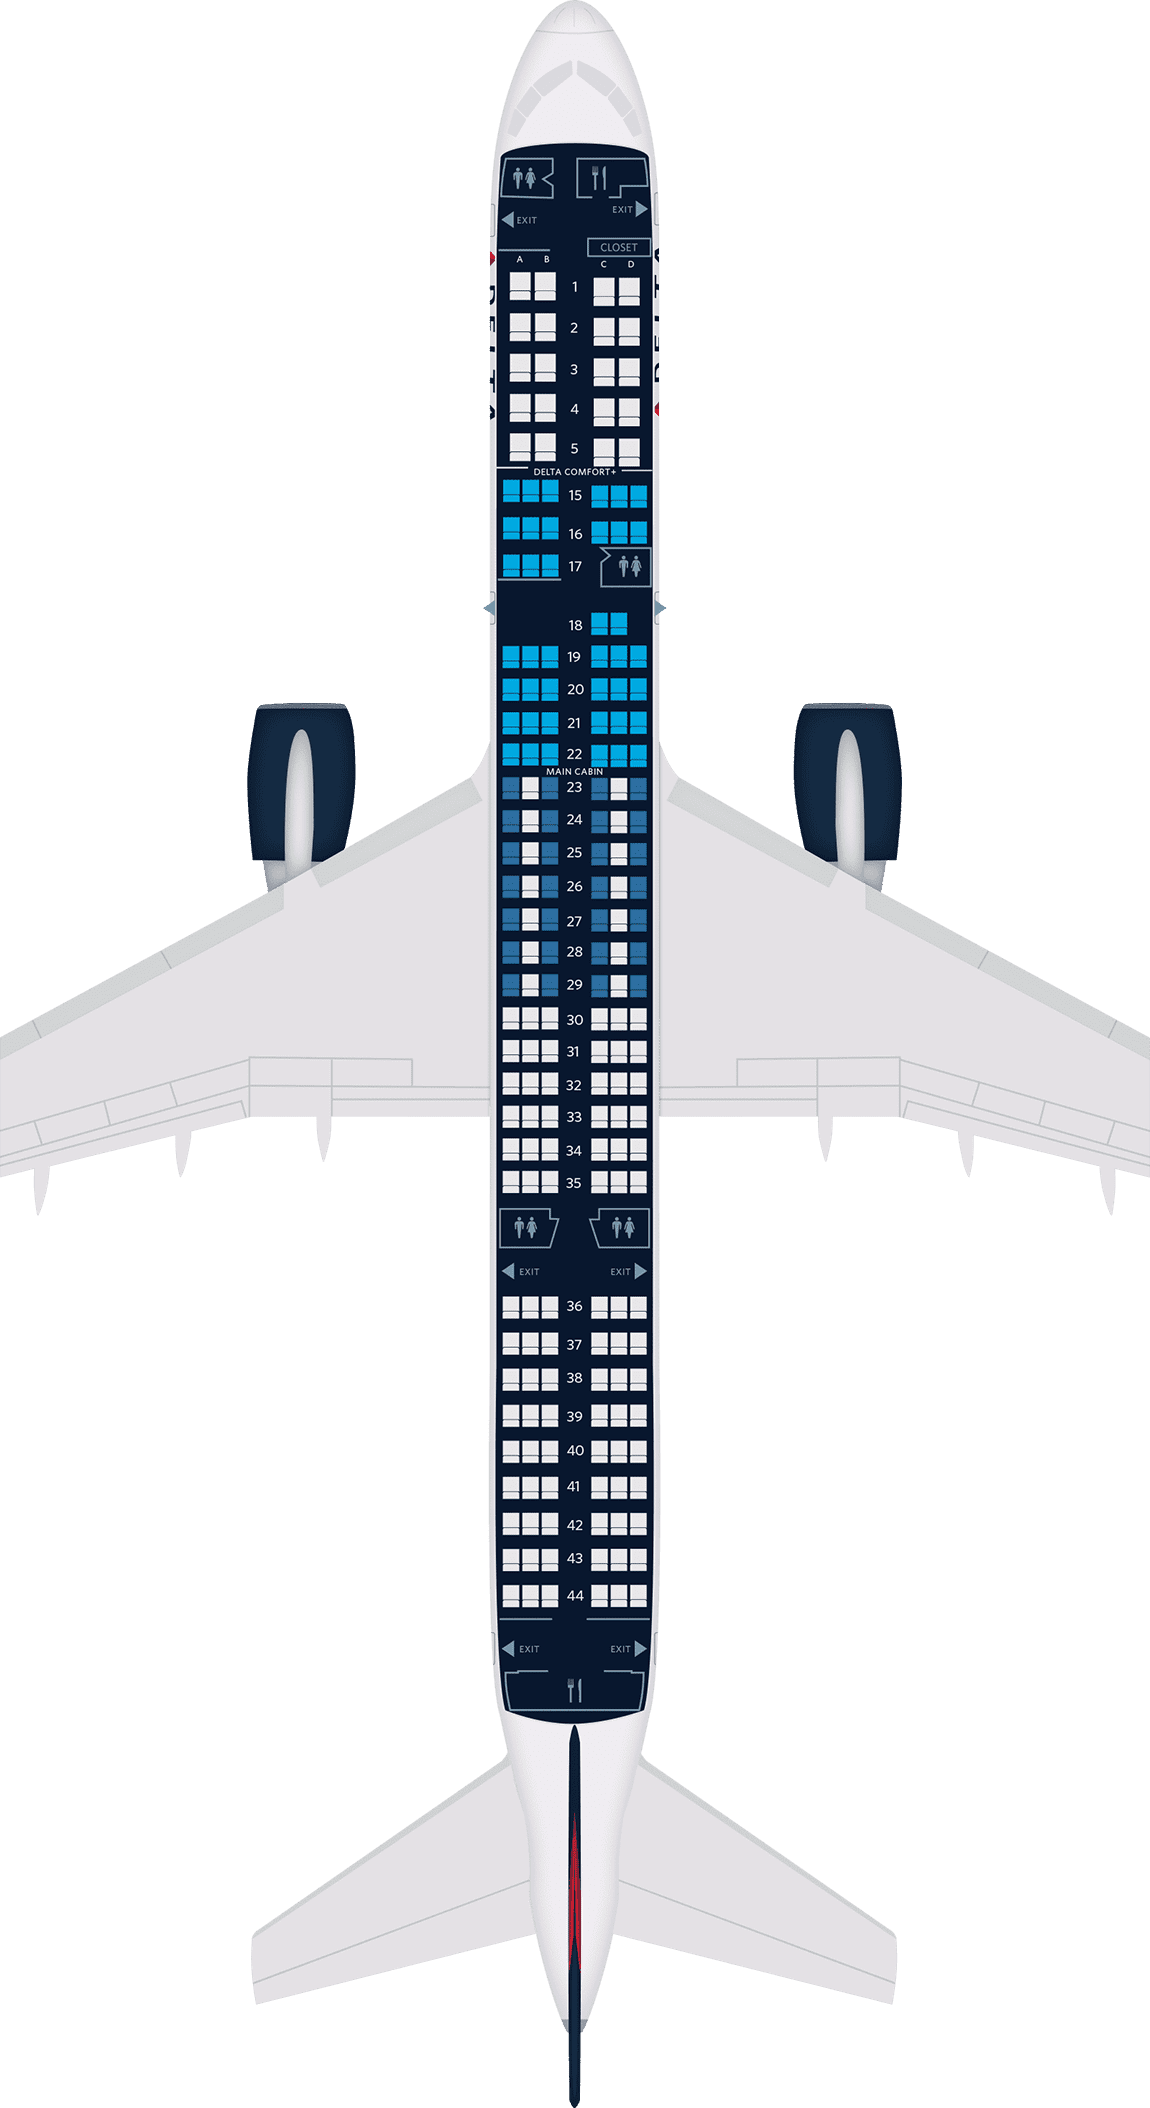 Delta Boeing 757 Seating Chart